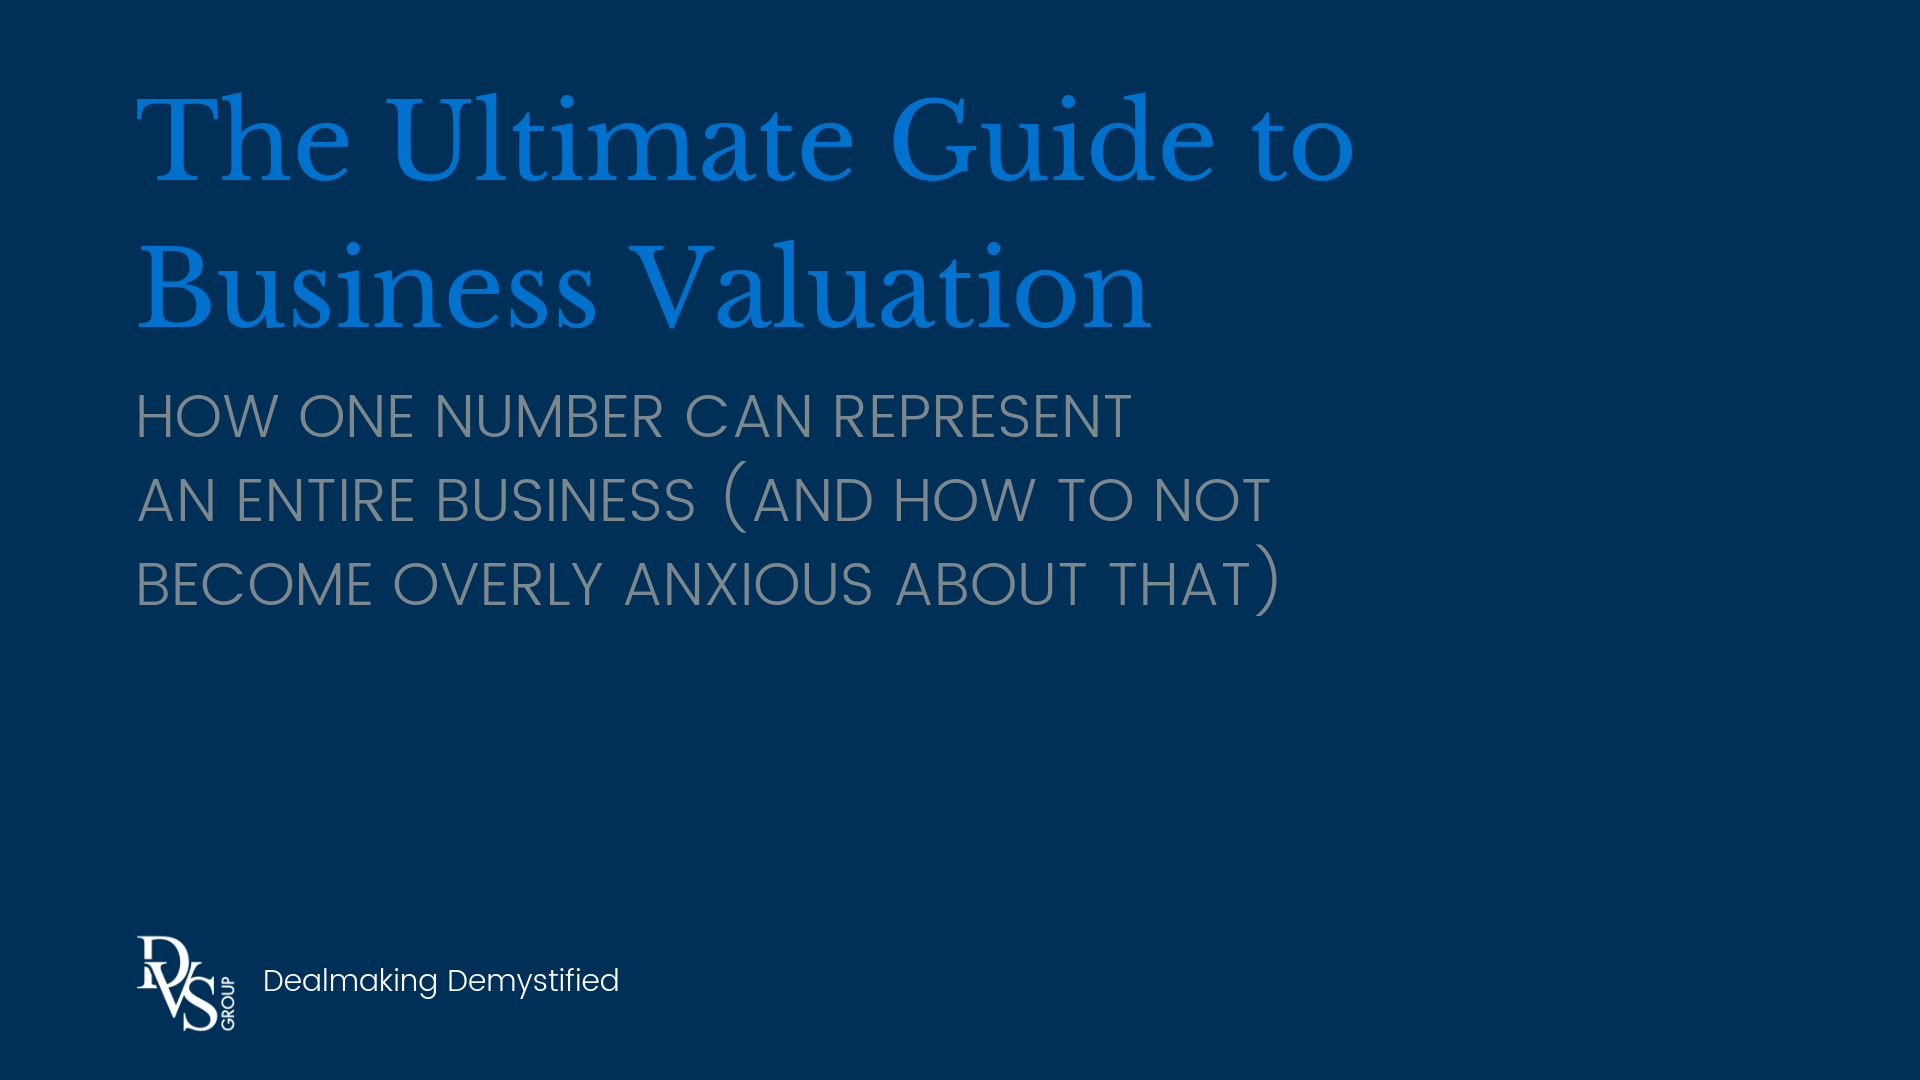 The Ultimate Guide to Business Valuation